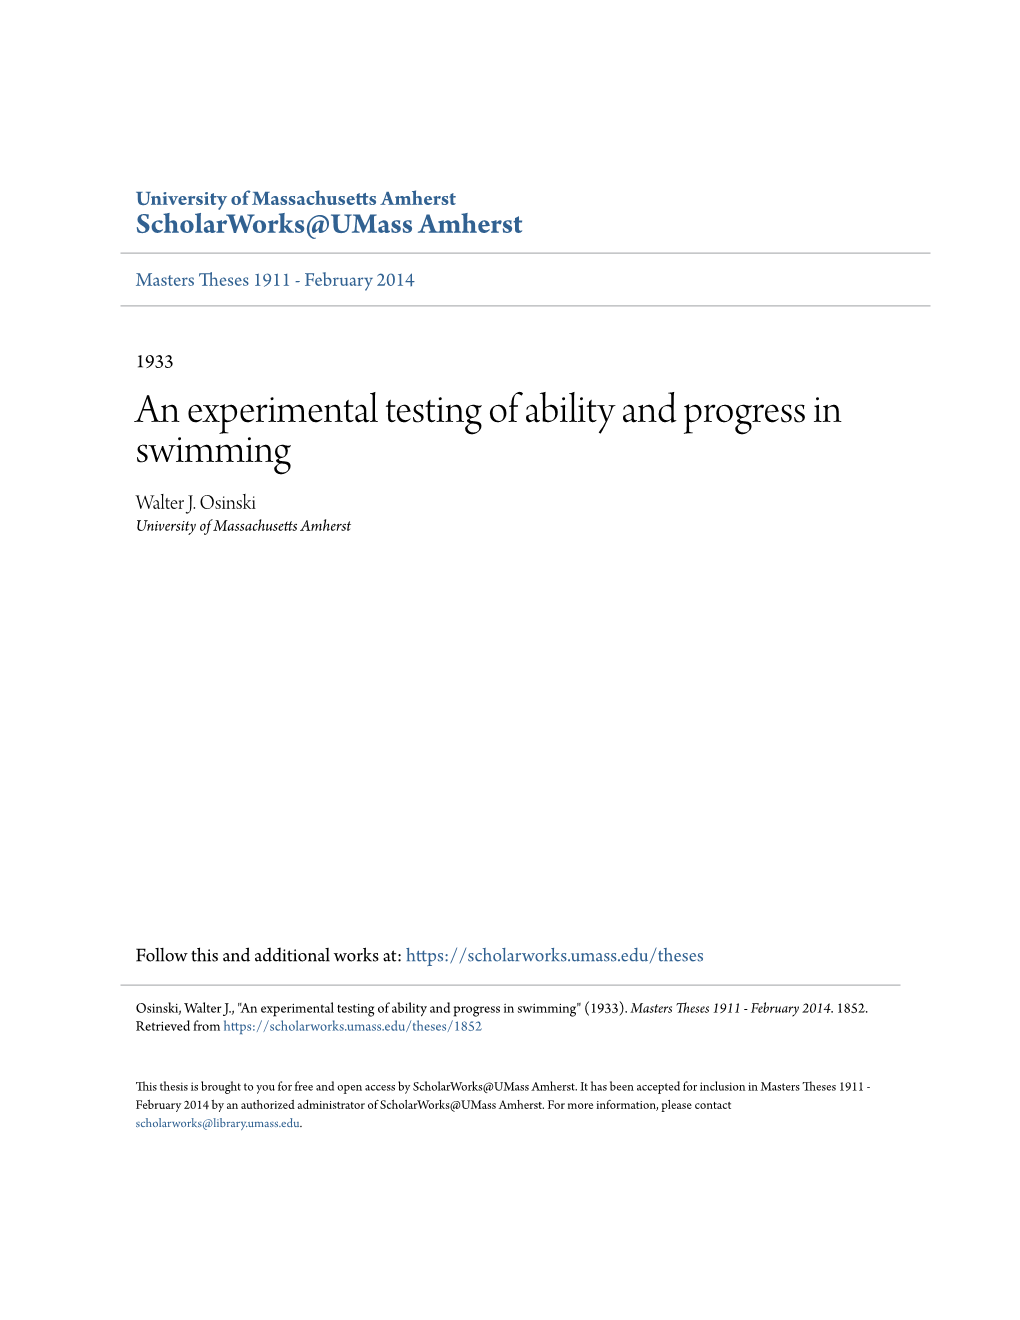 An Experimental Testing of Ability and Progress in Swimming Walter J